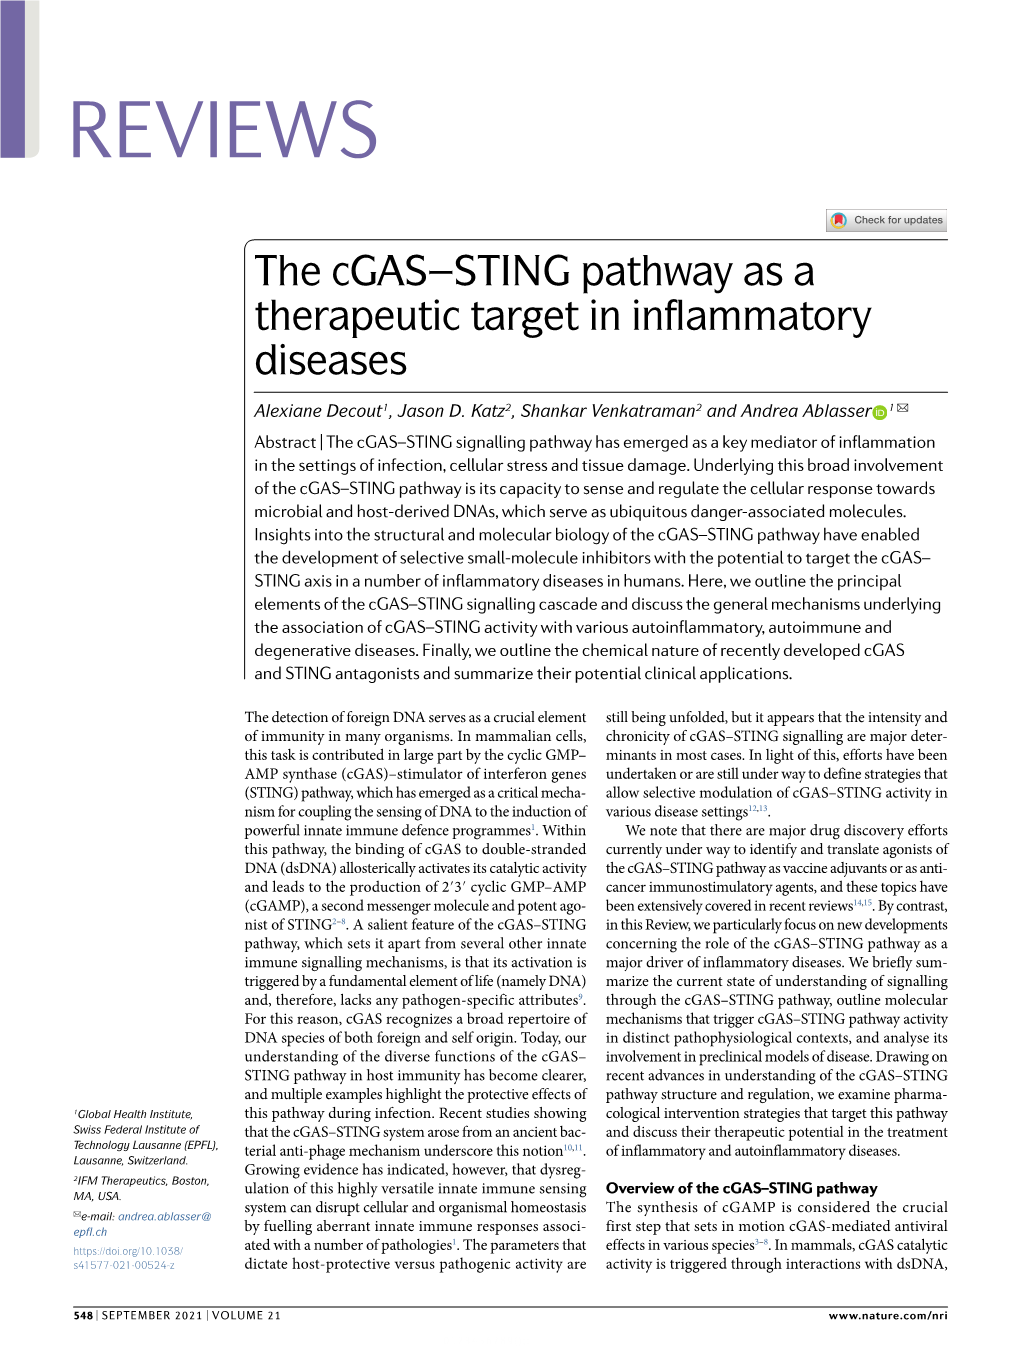 The Cgas–STING Pathway As a Therapeutic Target in Inflammatory Diseases